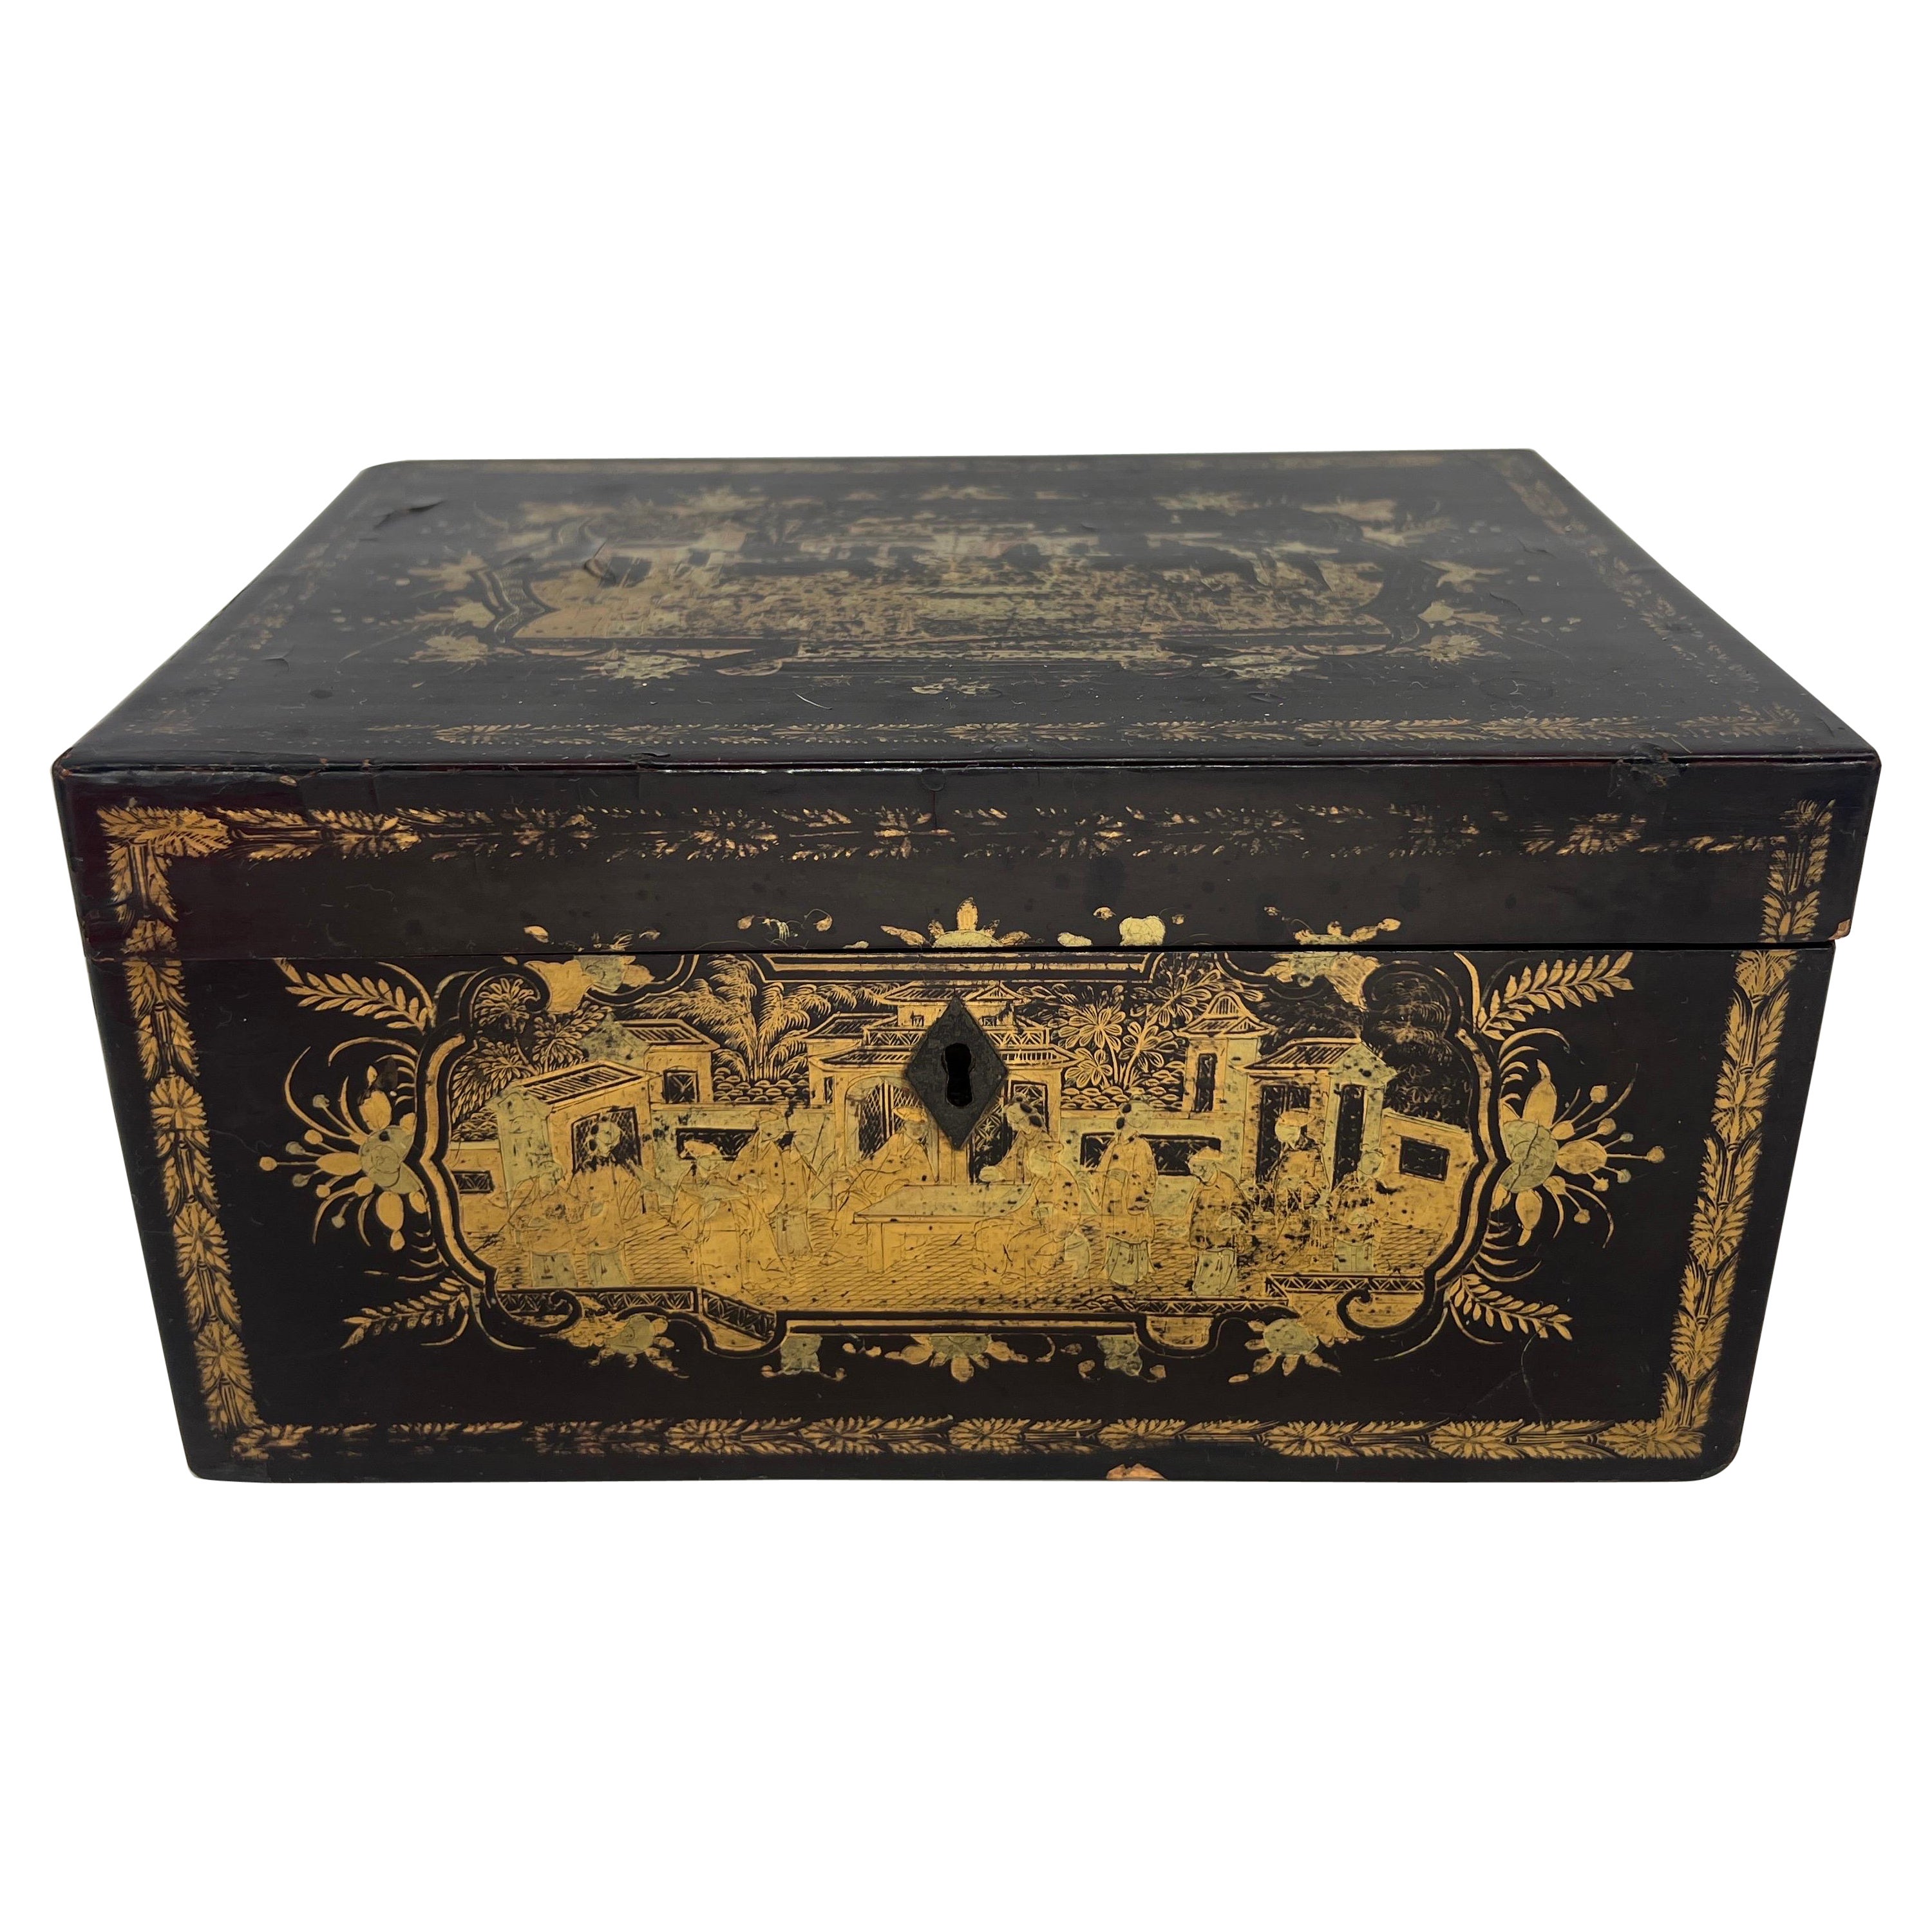 19th Century Chinese Export Lacquer Decorated Tea Caddy Box For Sale